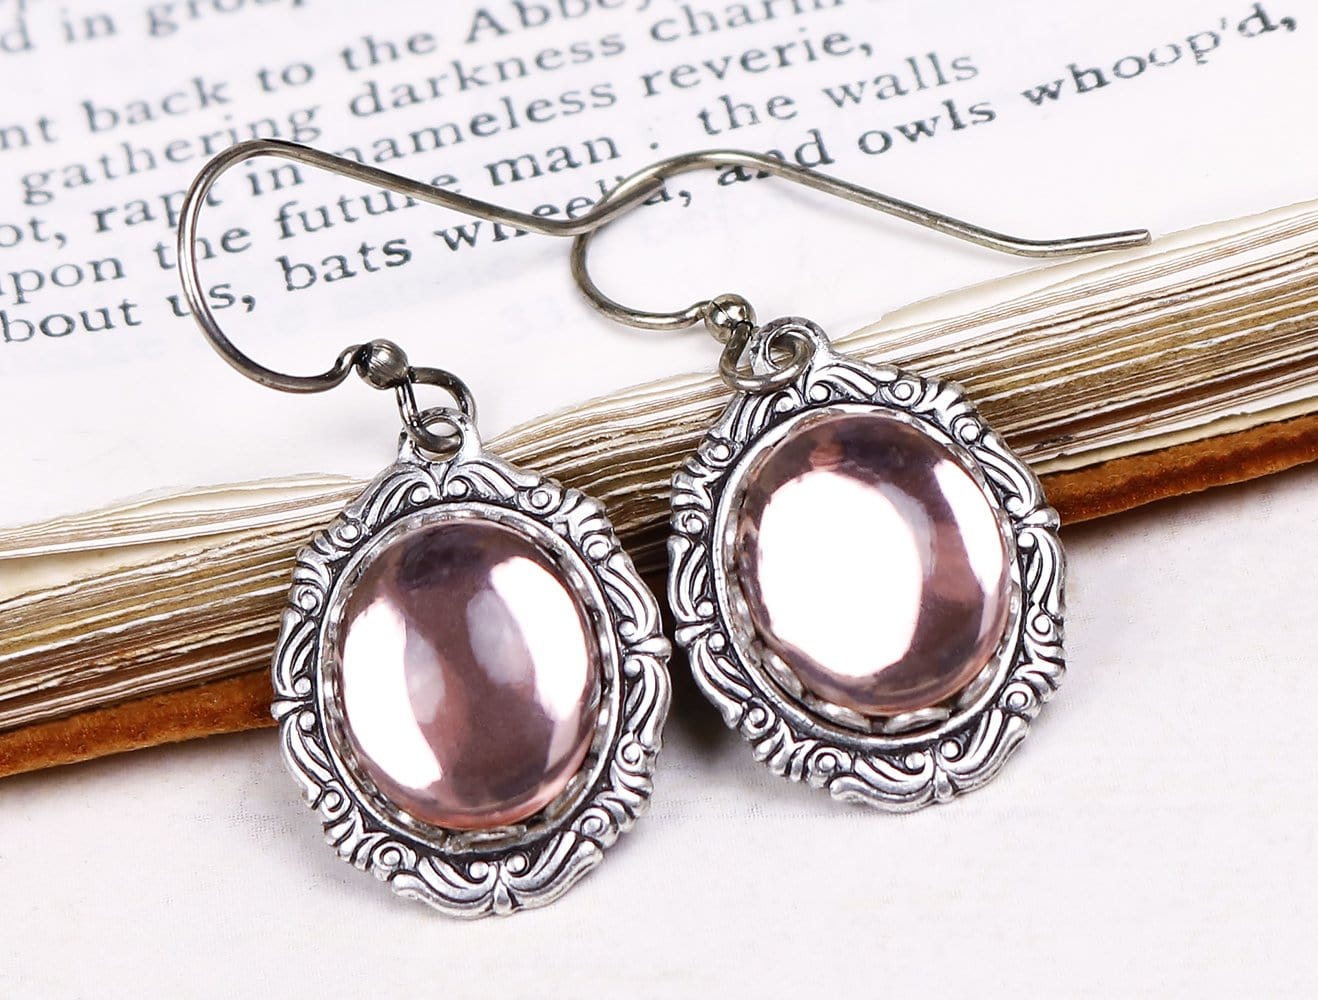 Perceval Earrings in Pale Rosebud - Antiqued Silver by dosha of Rabbitwood & Reason